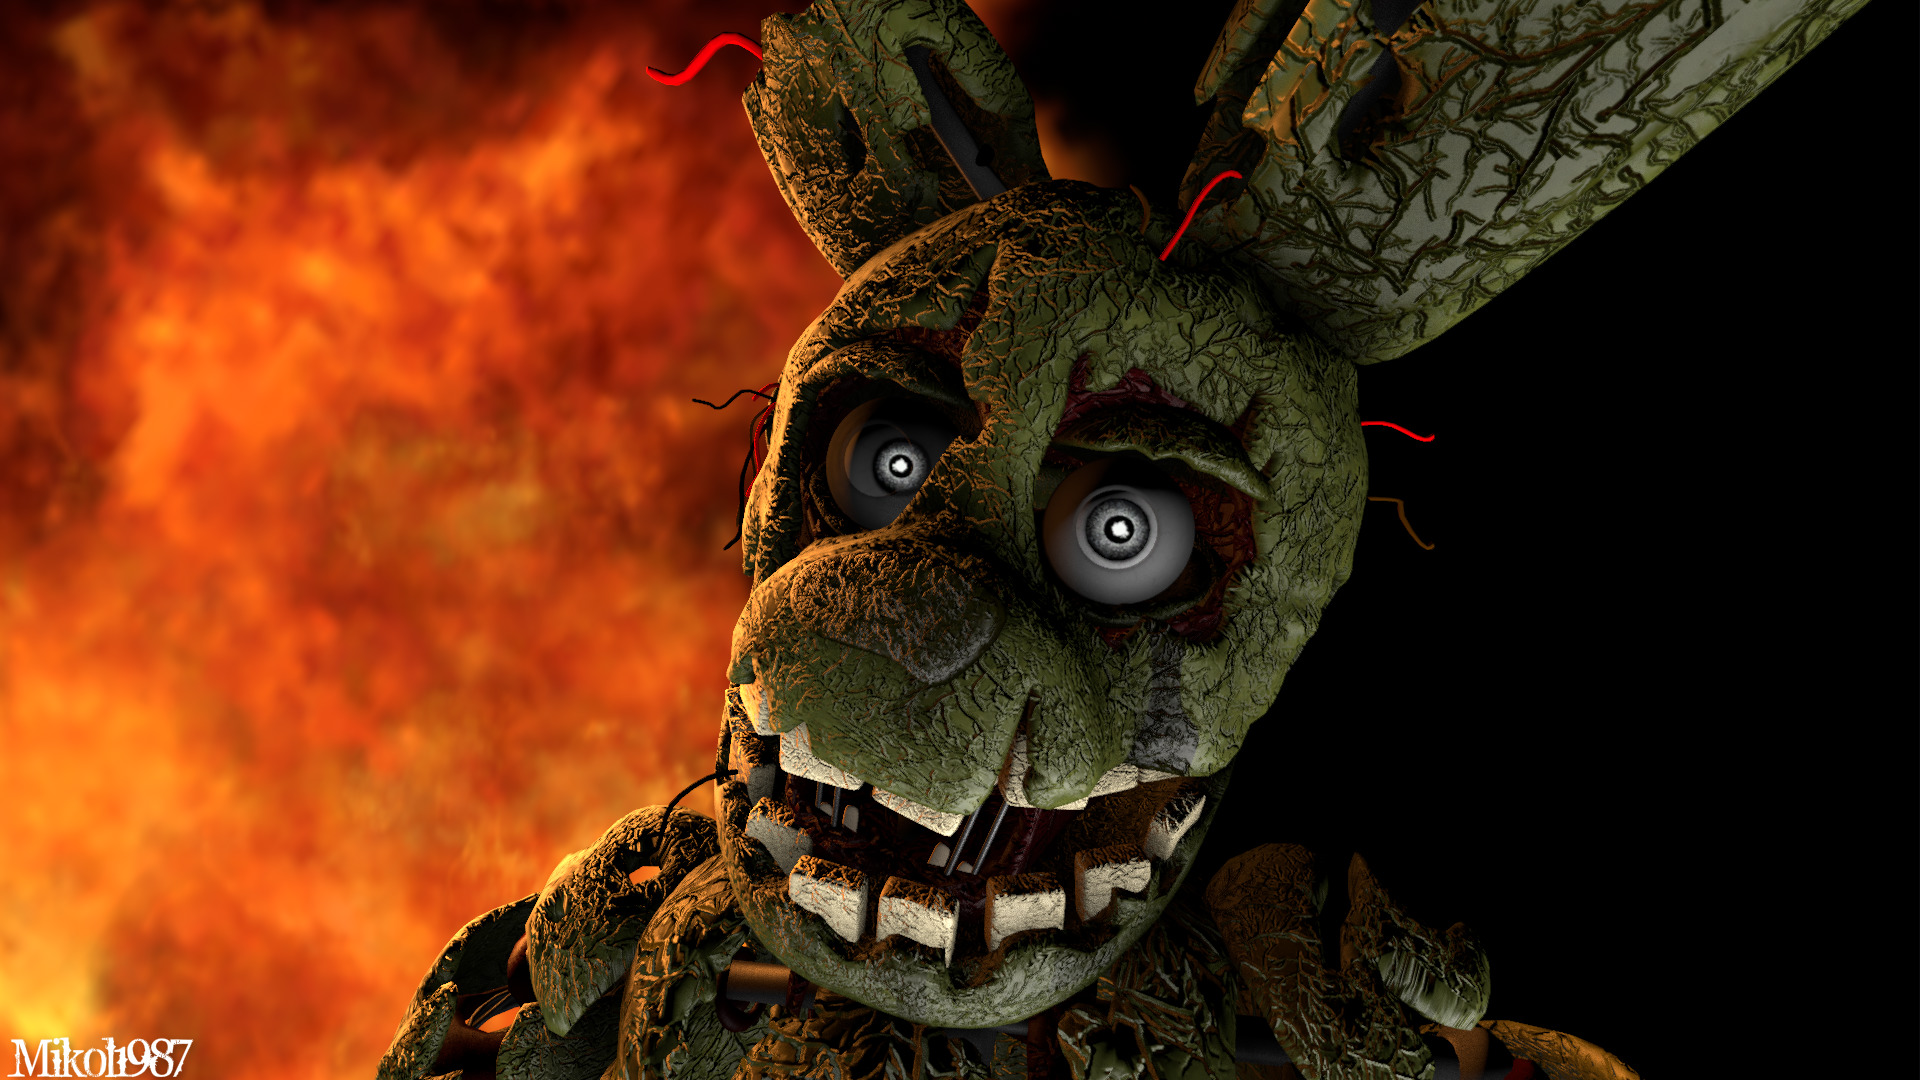 Download Five Nights at Freddy's 3 Free Full PC Game